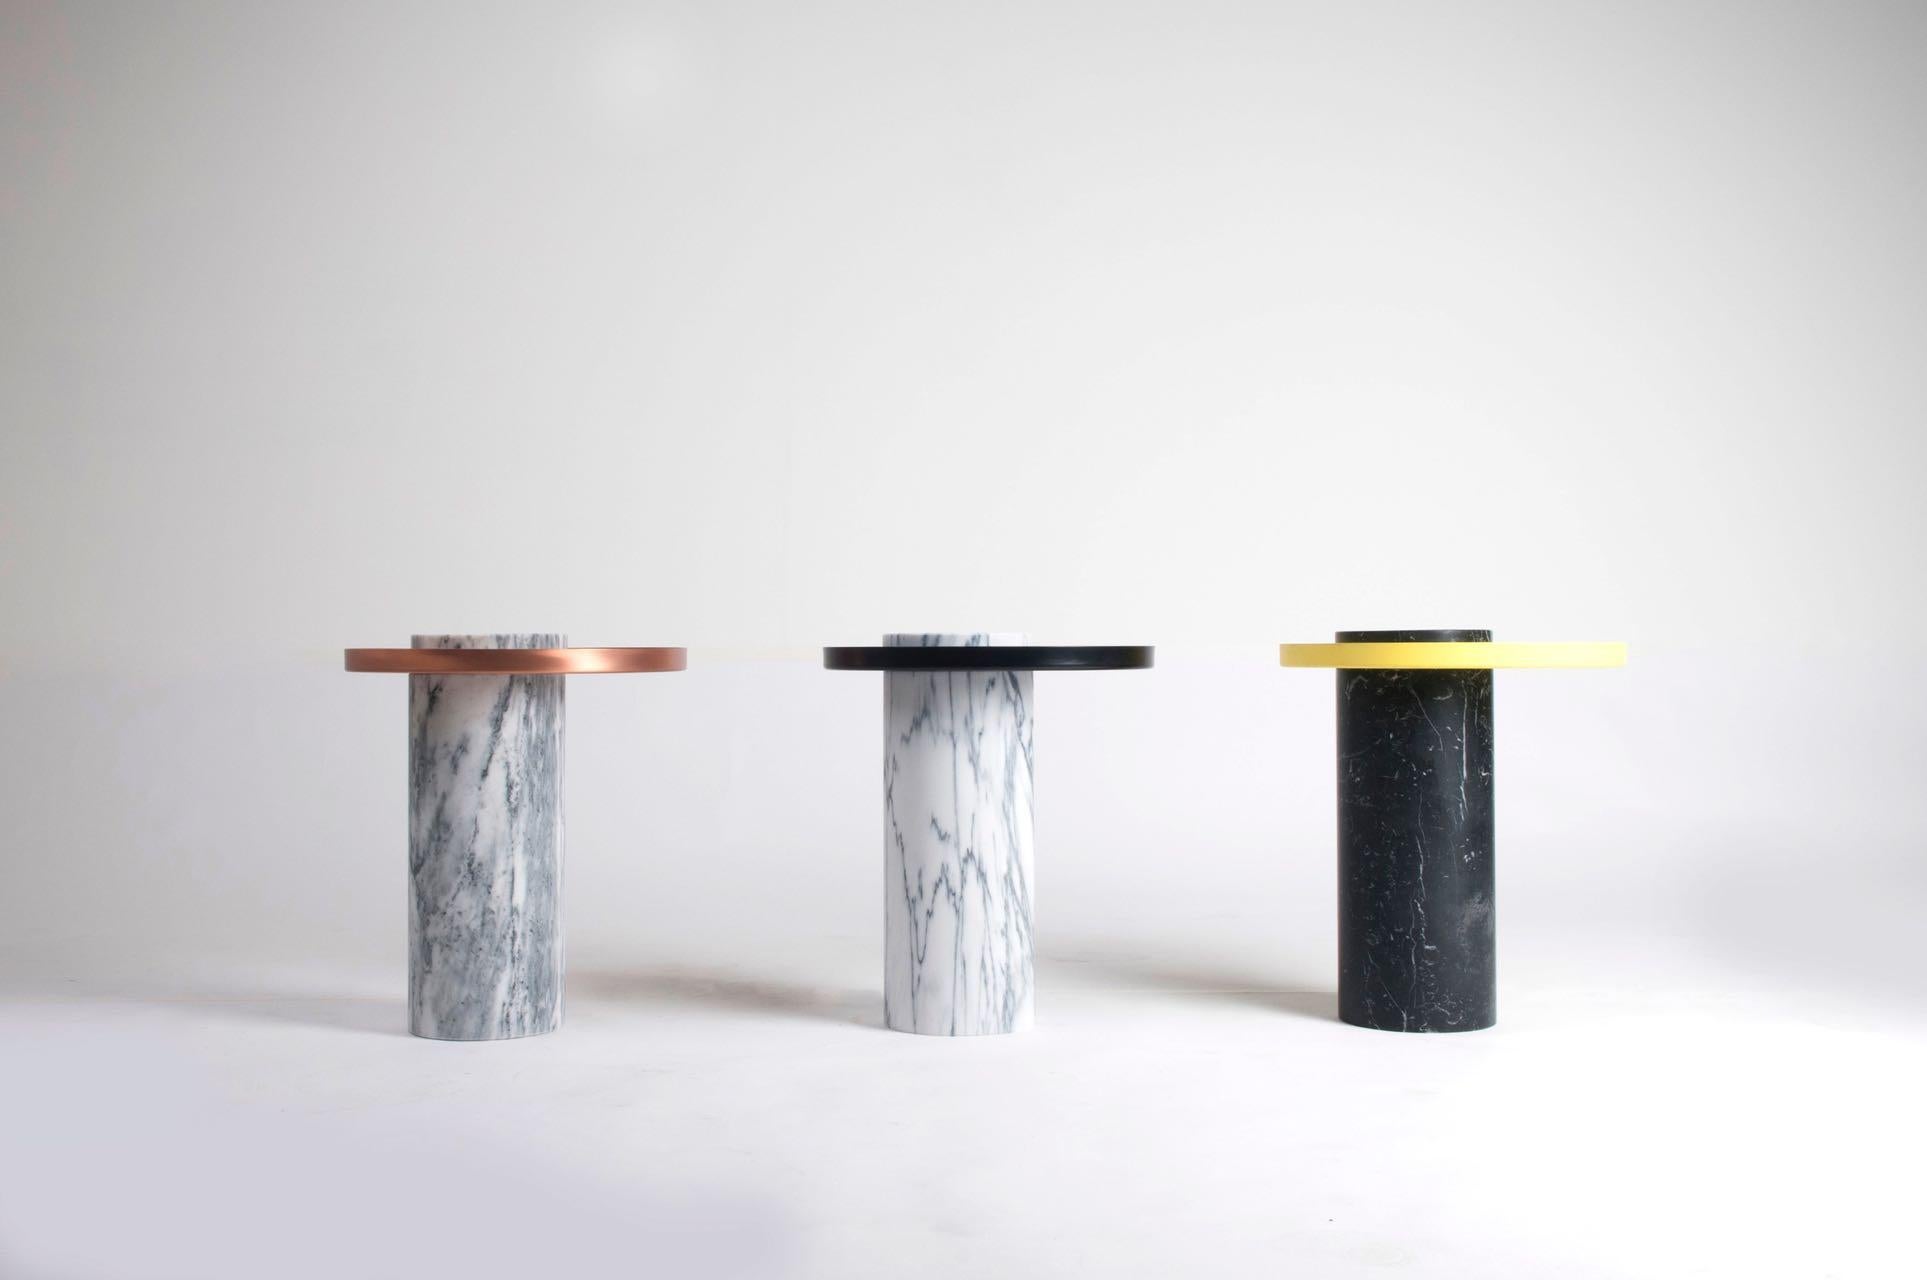 Salute is a family of tables mixing marble and metal for a high visual impact. As an occasional table, Salute is the perfect companion to your iconic armchair or next to a comfy sofa, with its clean lines and yet strong personality.As a combination